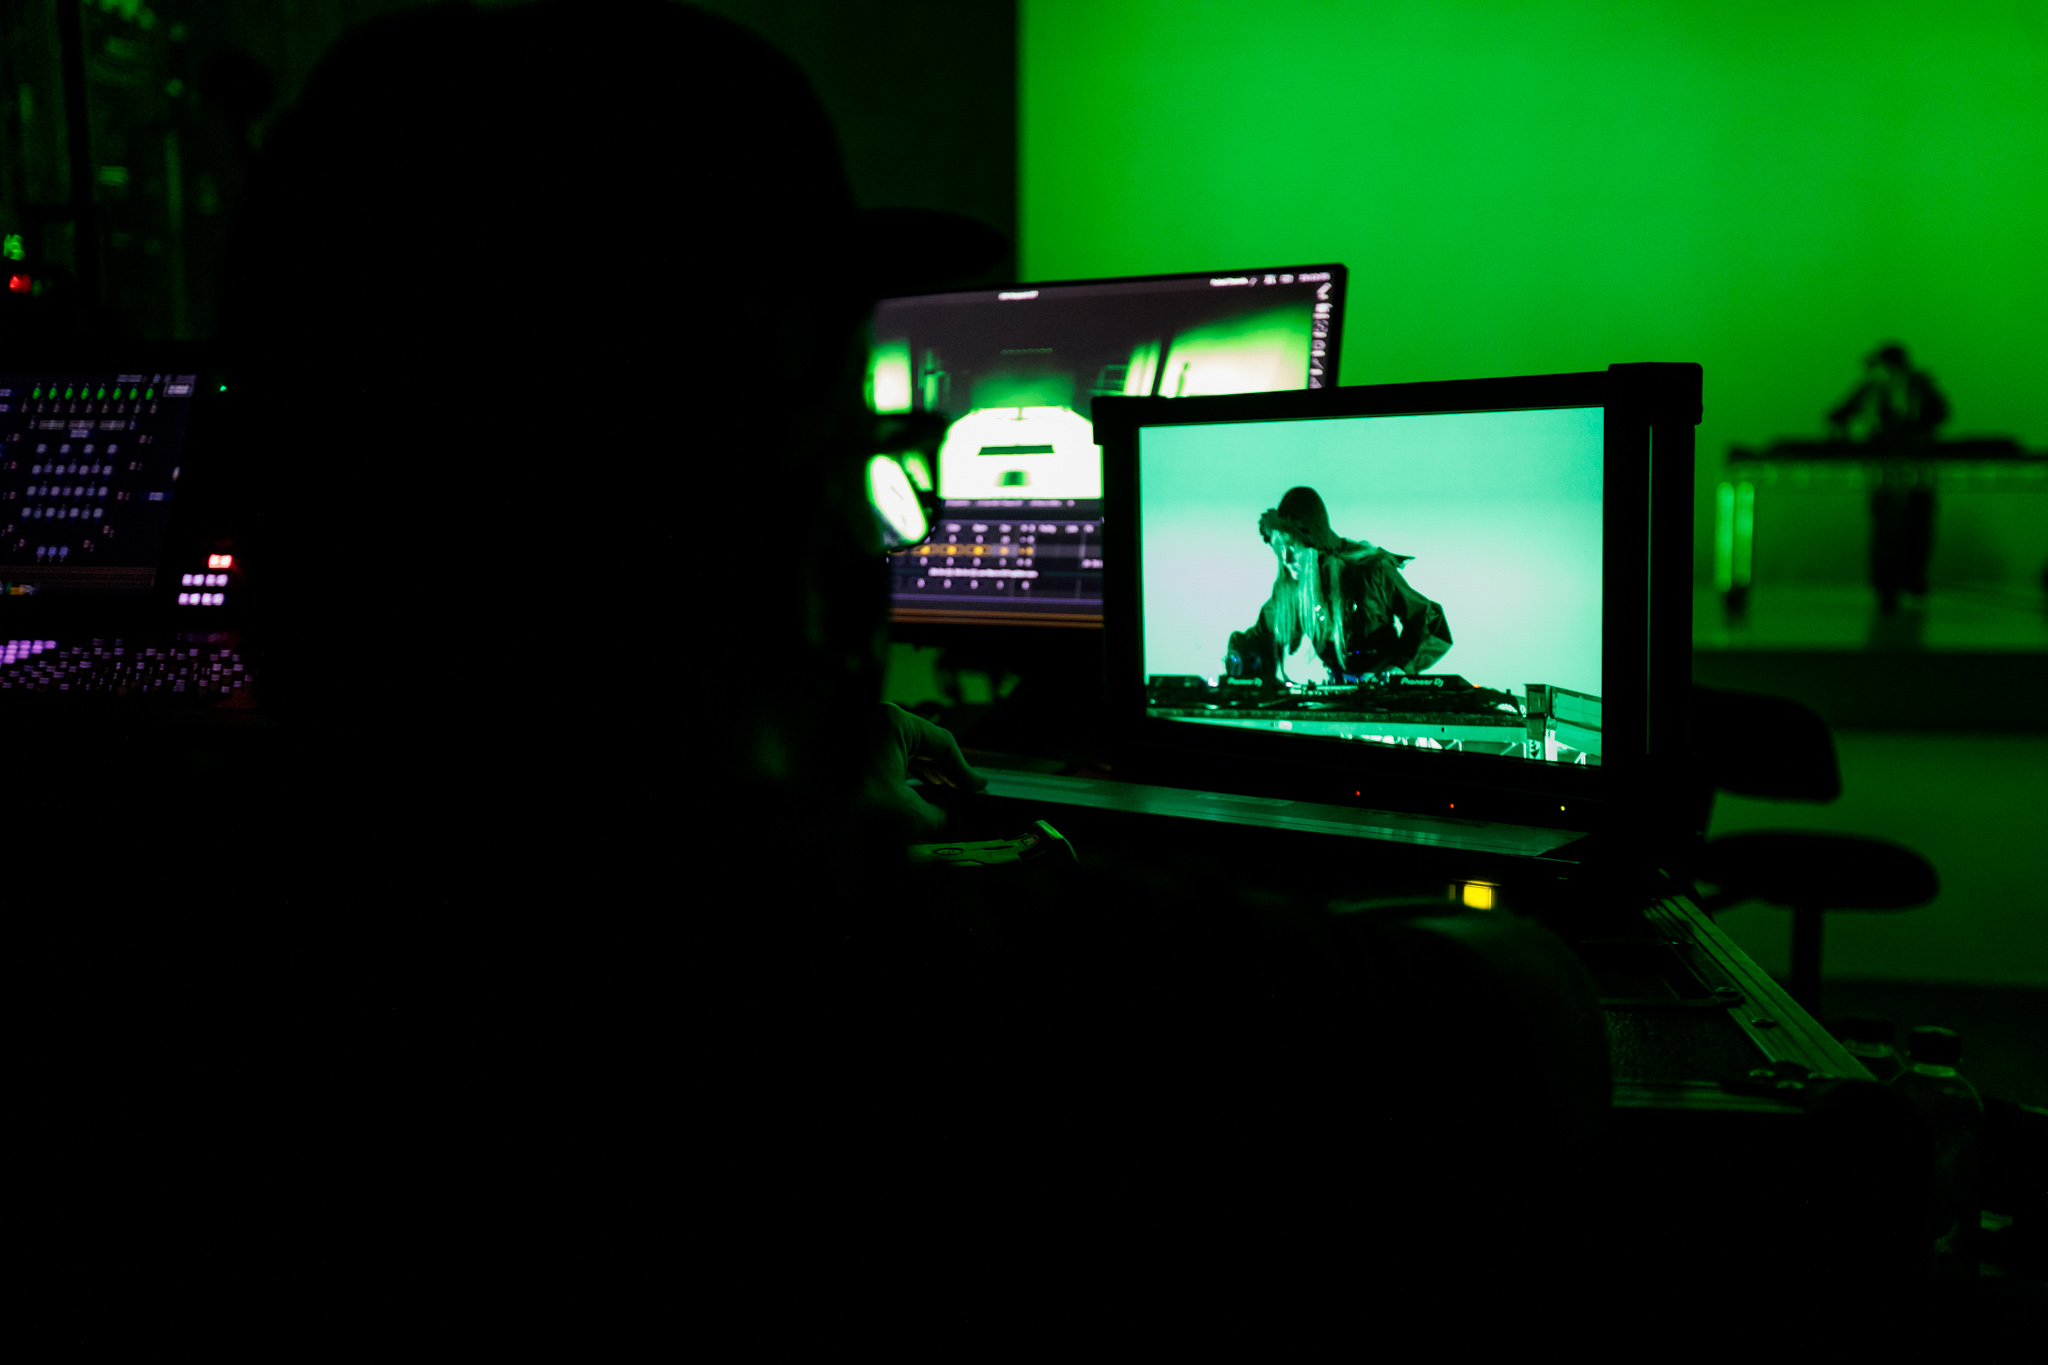 Producer's view through screens of a person standing over a deck in a recording room under a green light